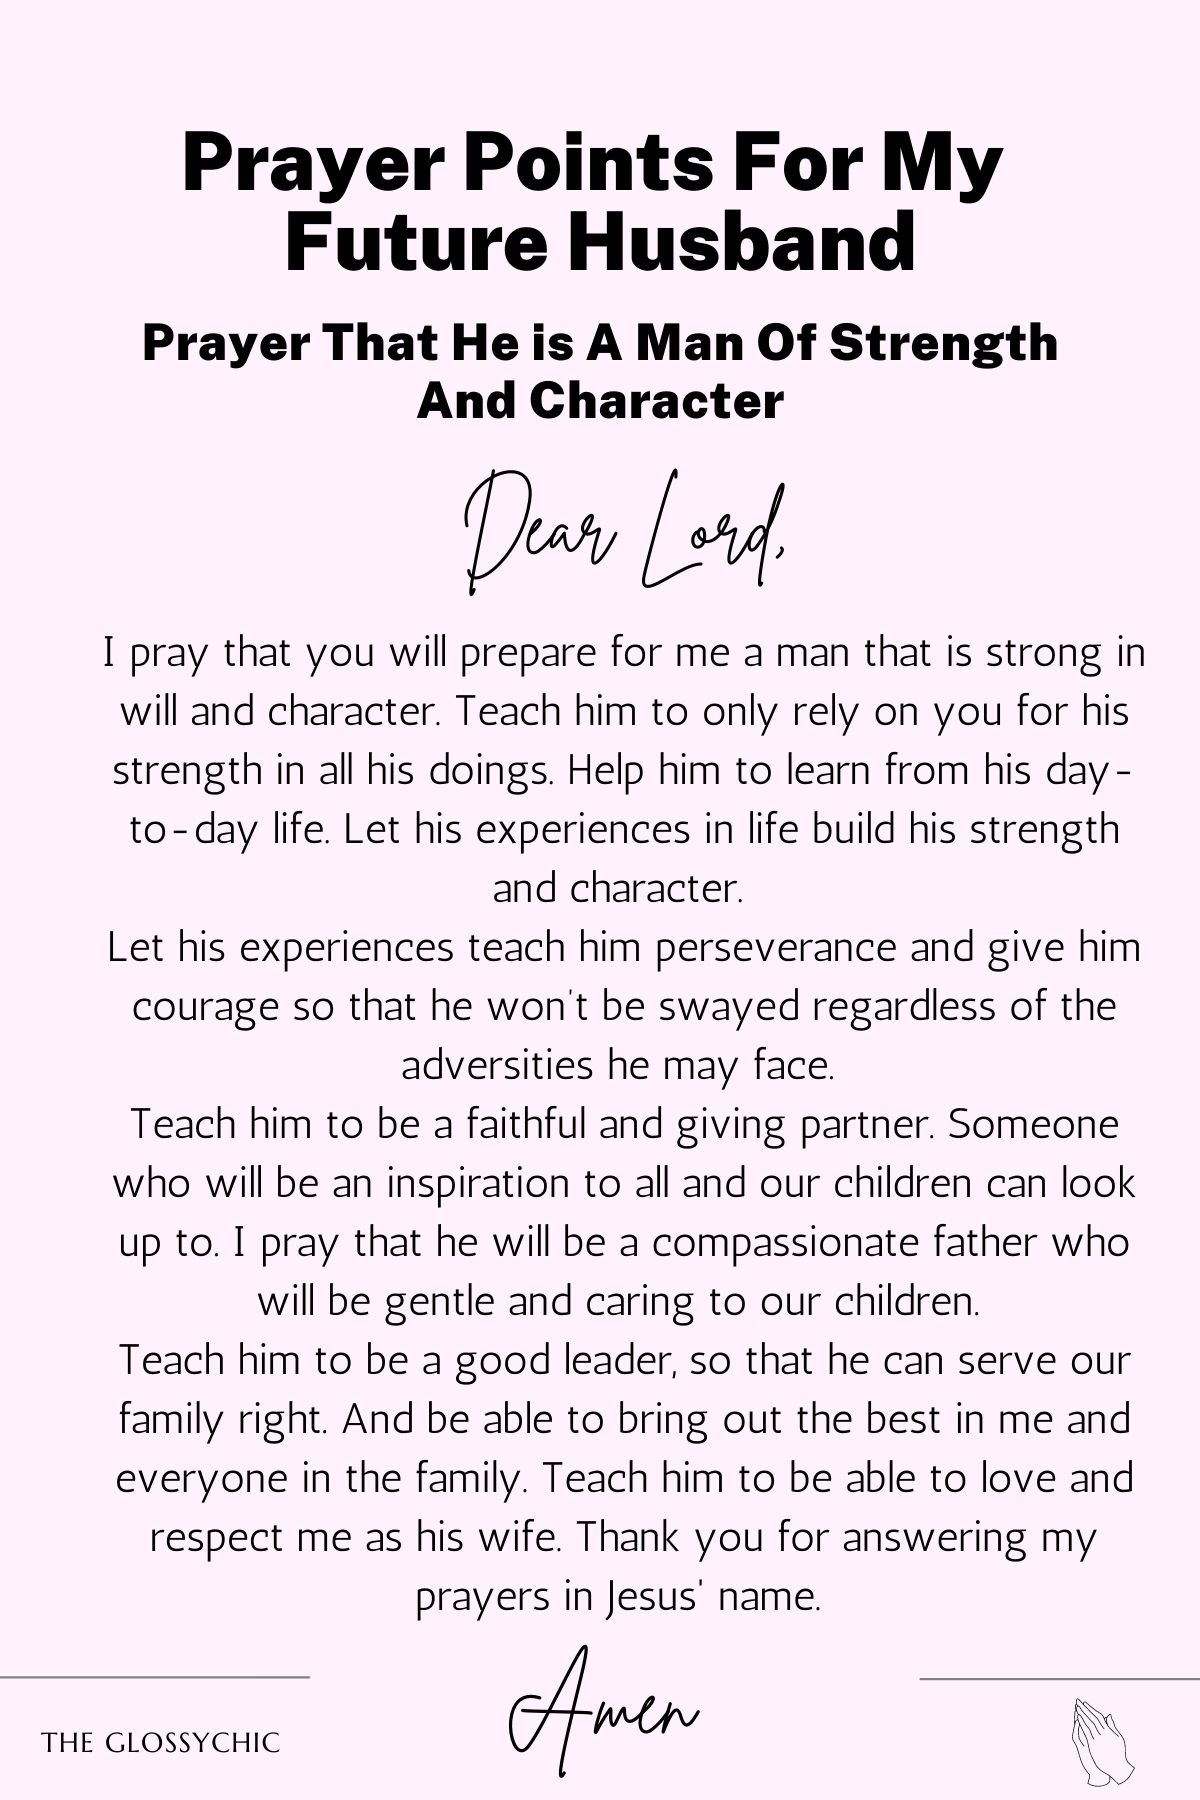 Prayer That He is A Man Of Strength And Character